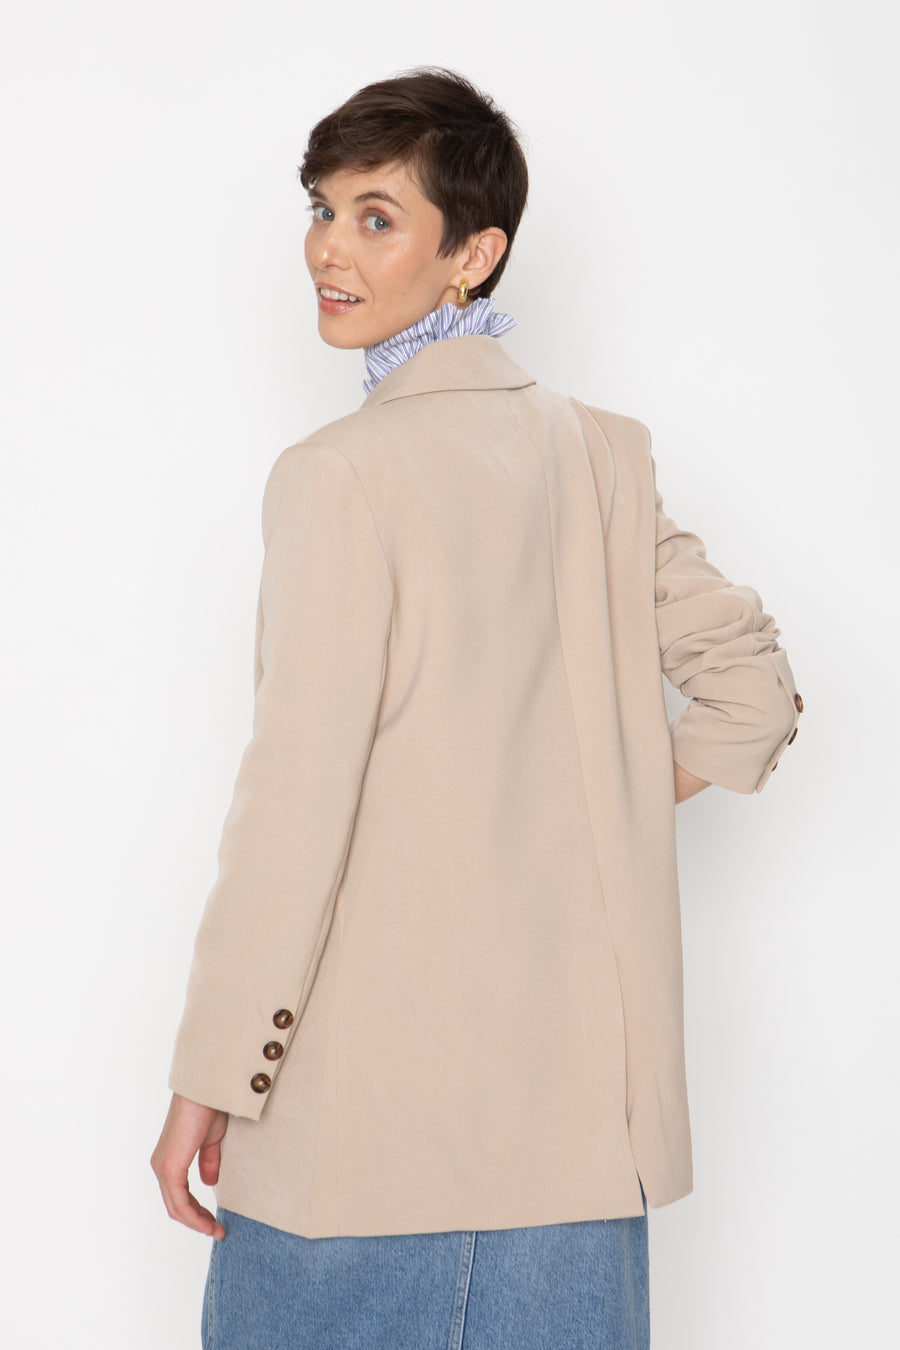 No Srcipt image - Images of 5 of 6 EMORY BLAZER OVERSIZED JACKET DOUBLE BREASTED BEIGE COLOR FLAP POCKETS 